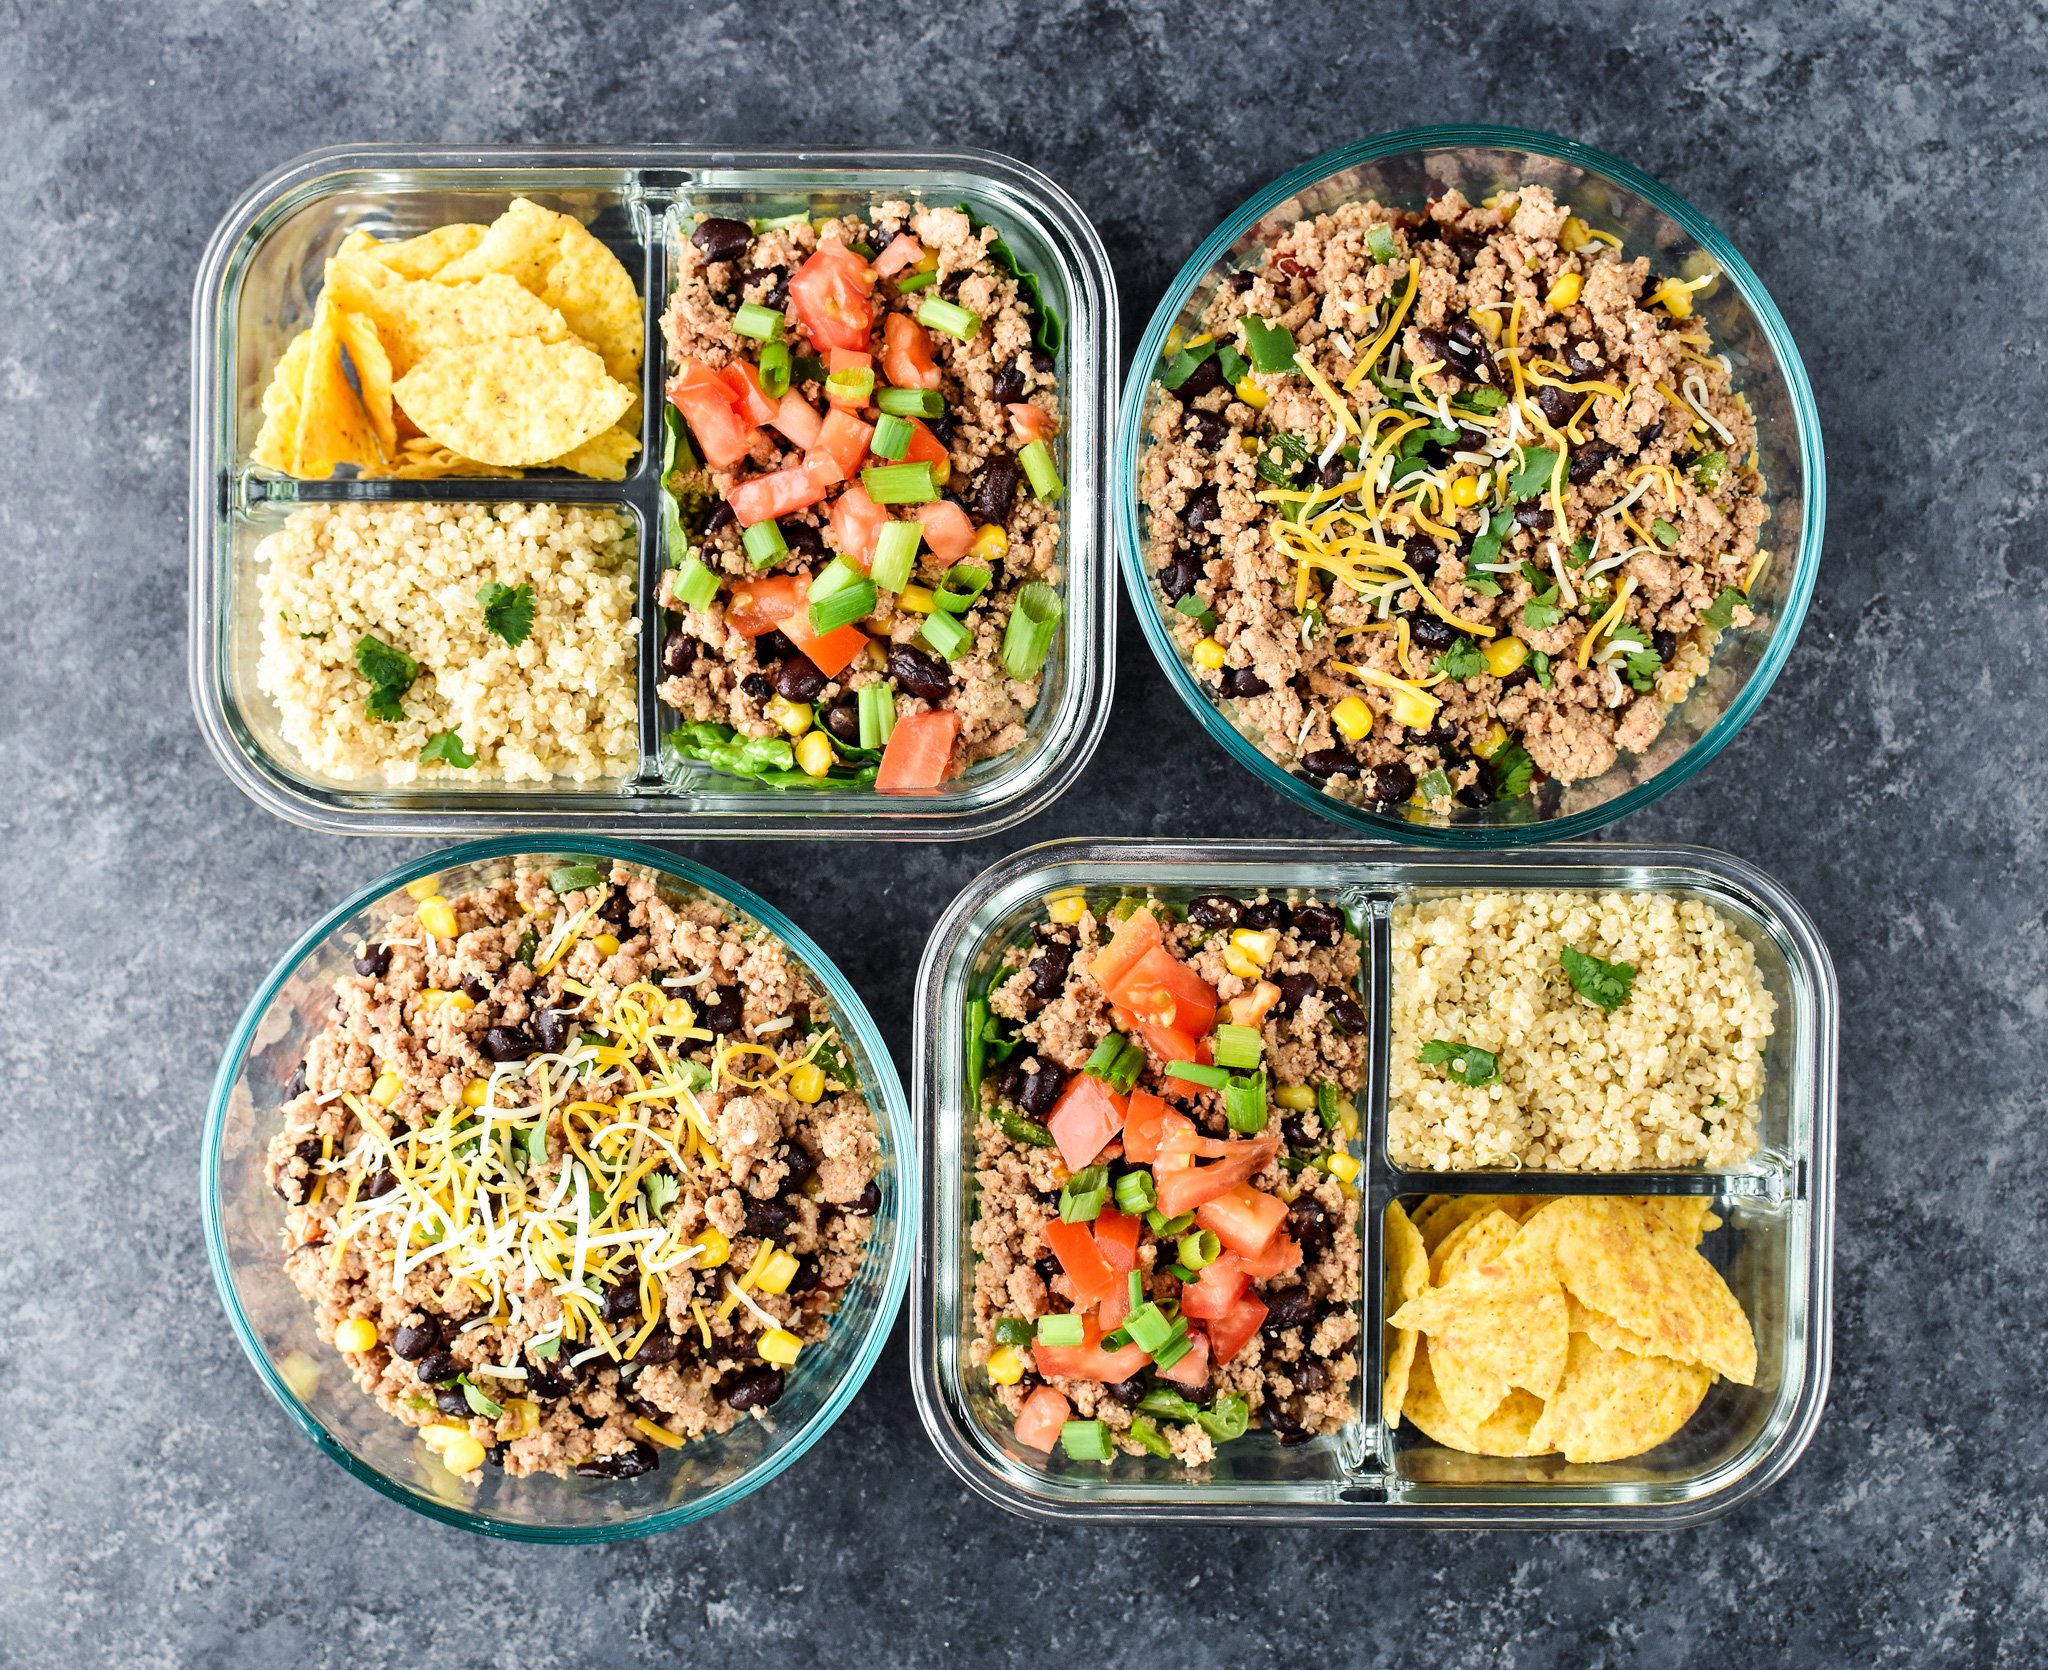 Four meal prepped lunches viewed from above for Hot & Cold Turkey Taco Meal Prep; two taco salads with quinoa and chips on the side and two taco bowls with tomato and green chili quinoa.